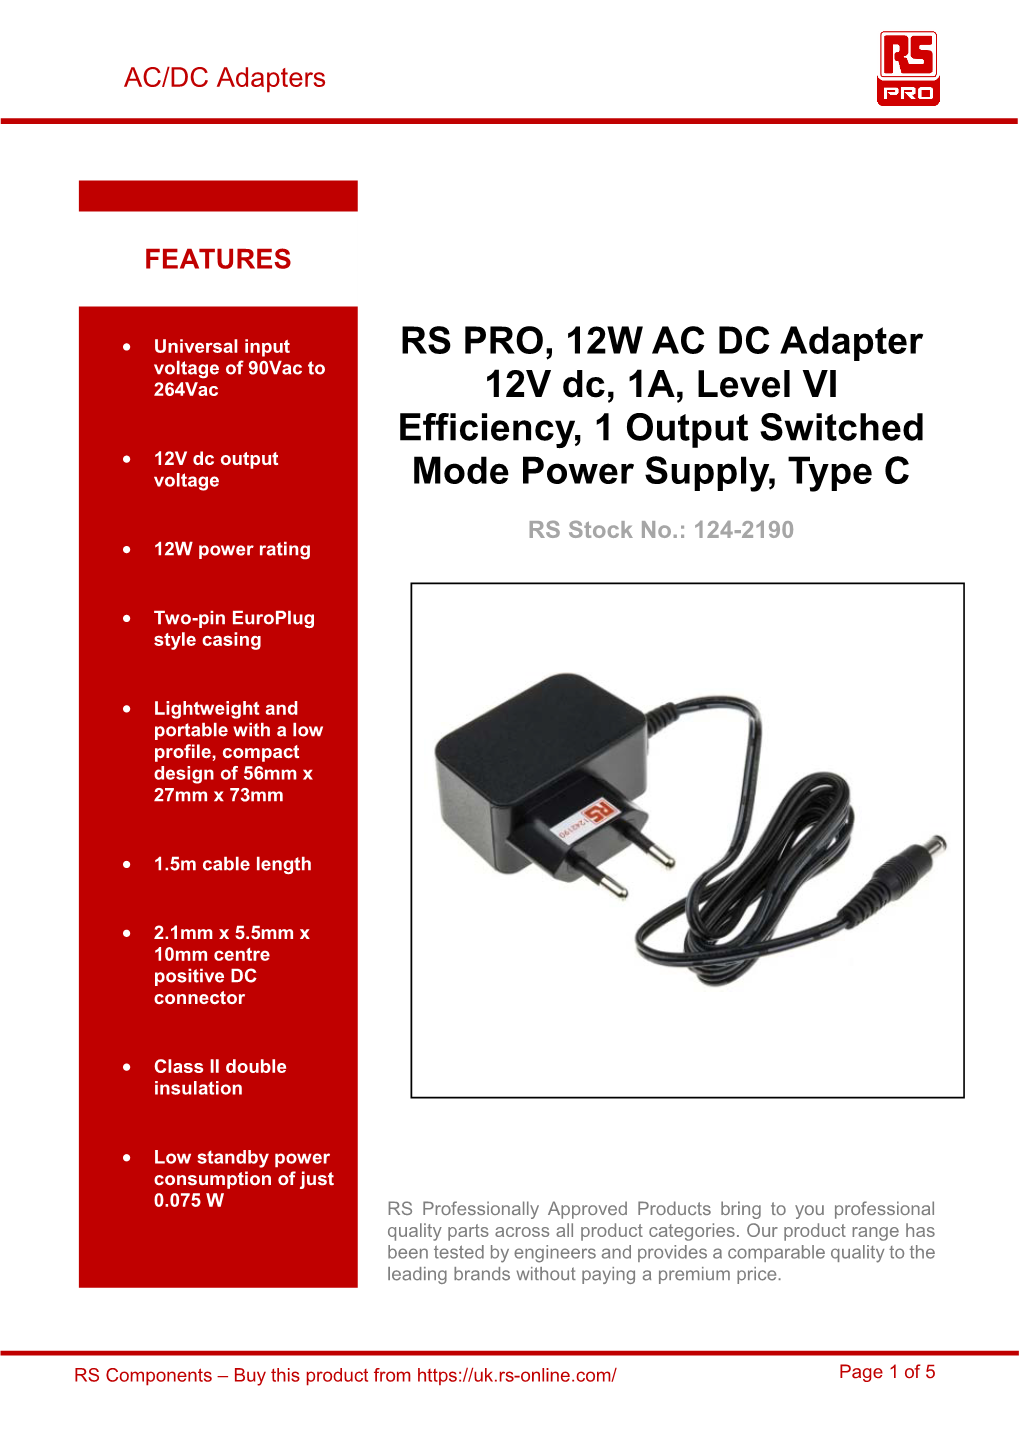 RS PRO, 12W AC DC Adapter 12V Dc, 1A, Level VI Efficiency, 1 Output Switched Mode Power Supply, Type C